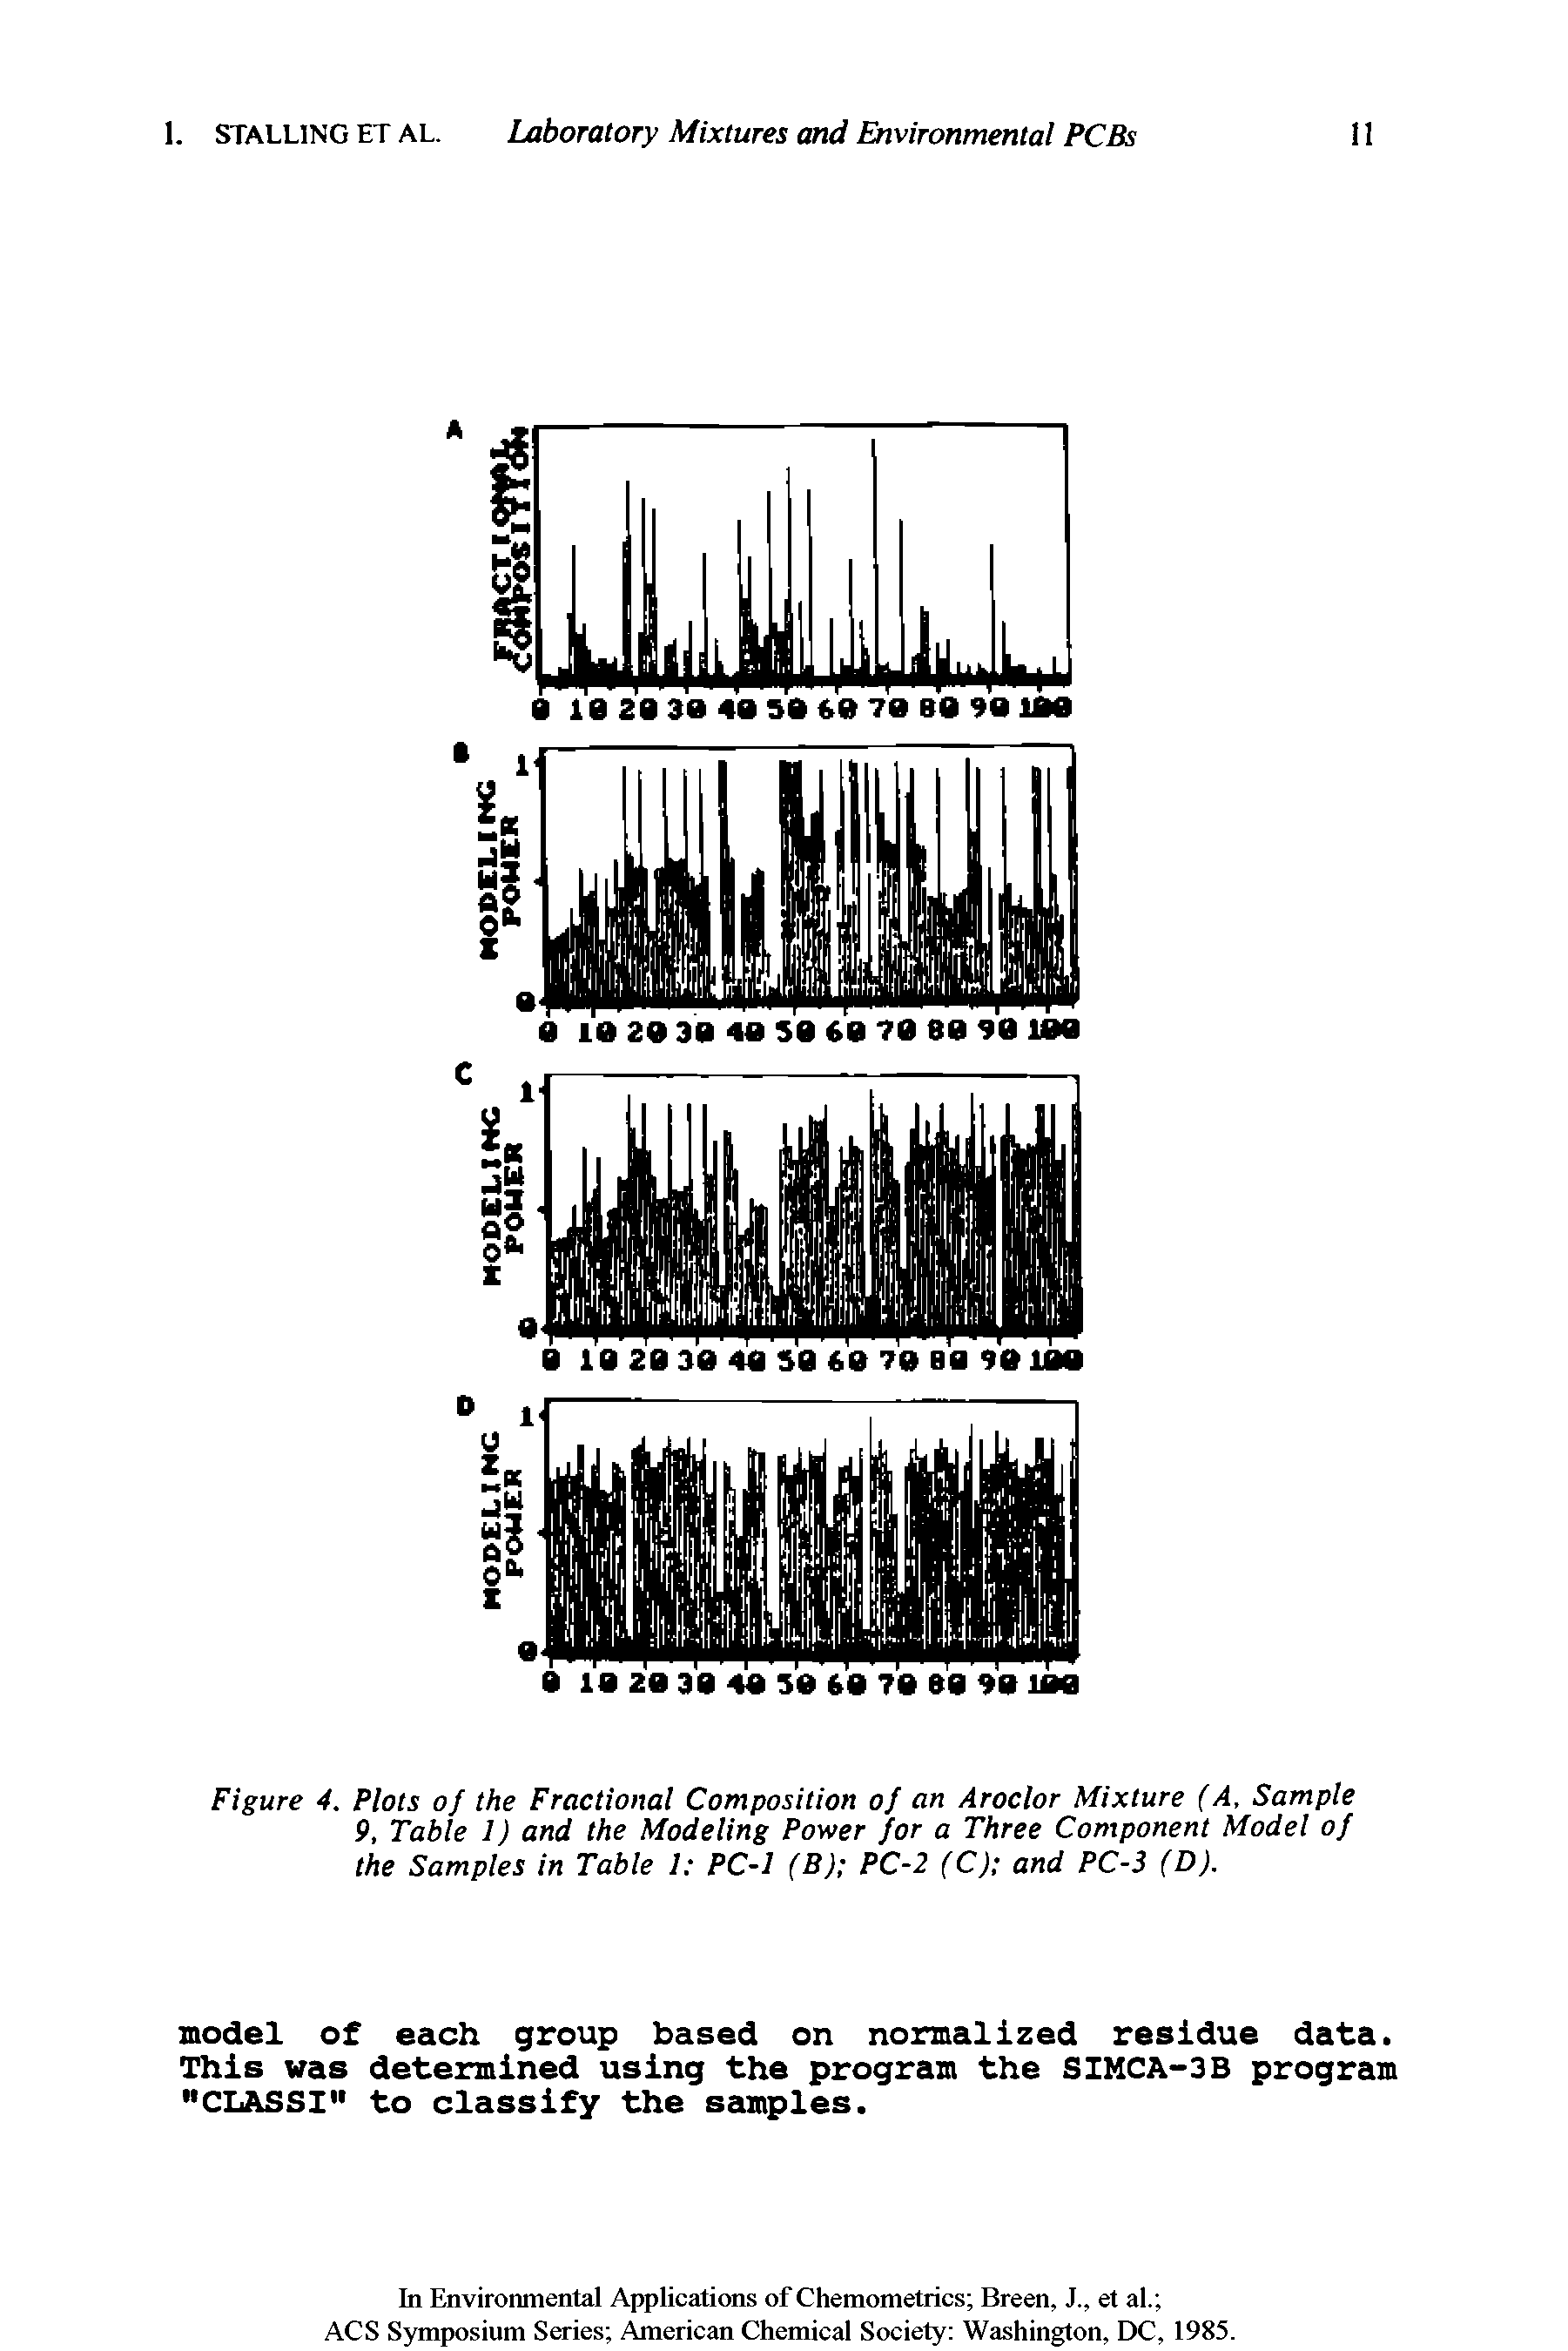 Figure 4. Plots of the Fractional Composition of an Aroclor Mixture (A, Sample 9, Table 1) and the Modeling Power for a Three Component Model of the Samples in Table 1 PC-1 (B) PC-2 (C) and PC-3 (D).